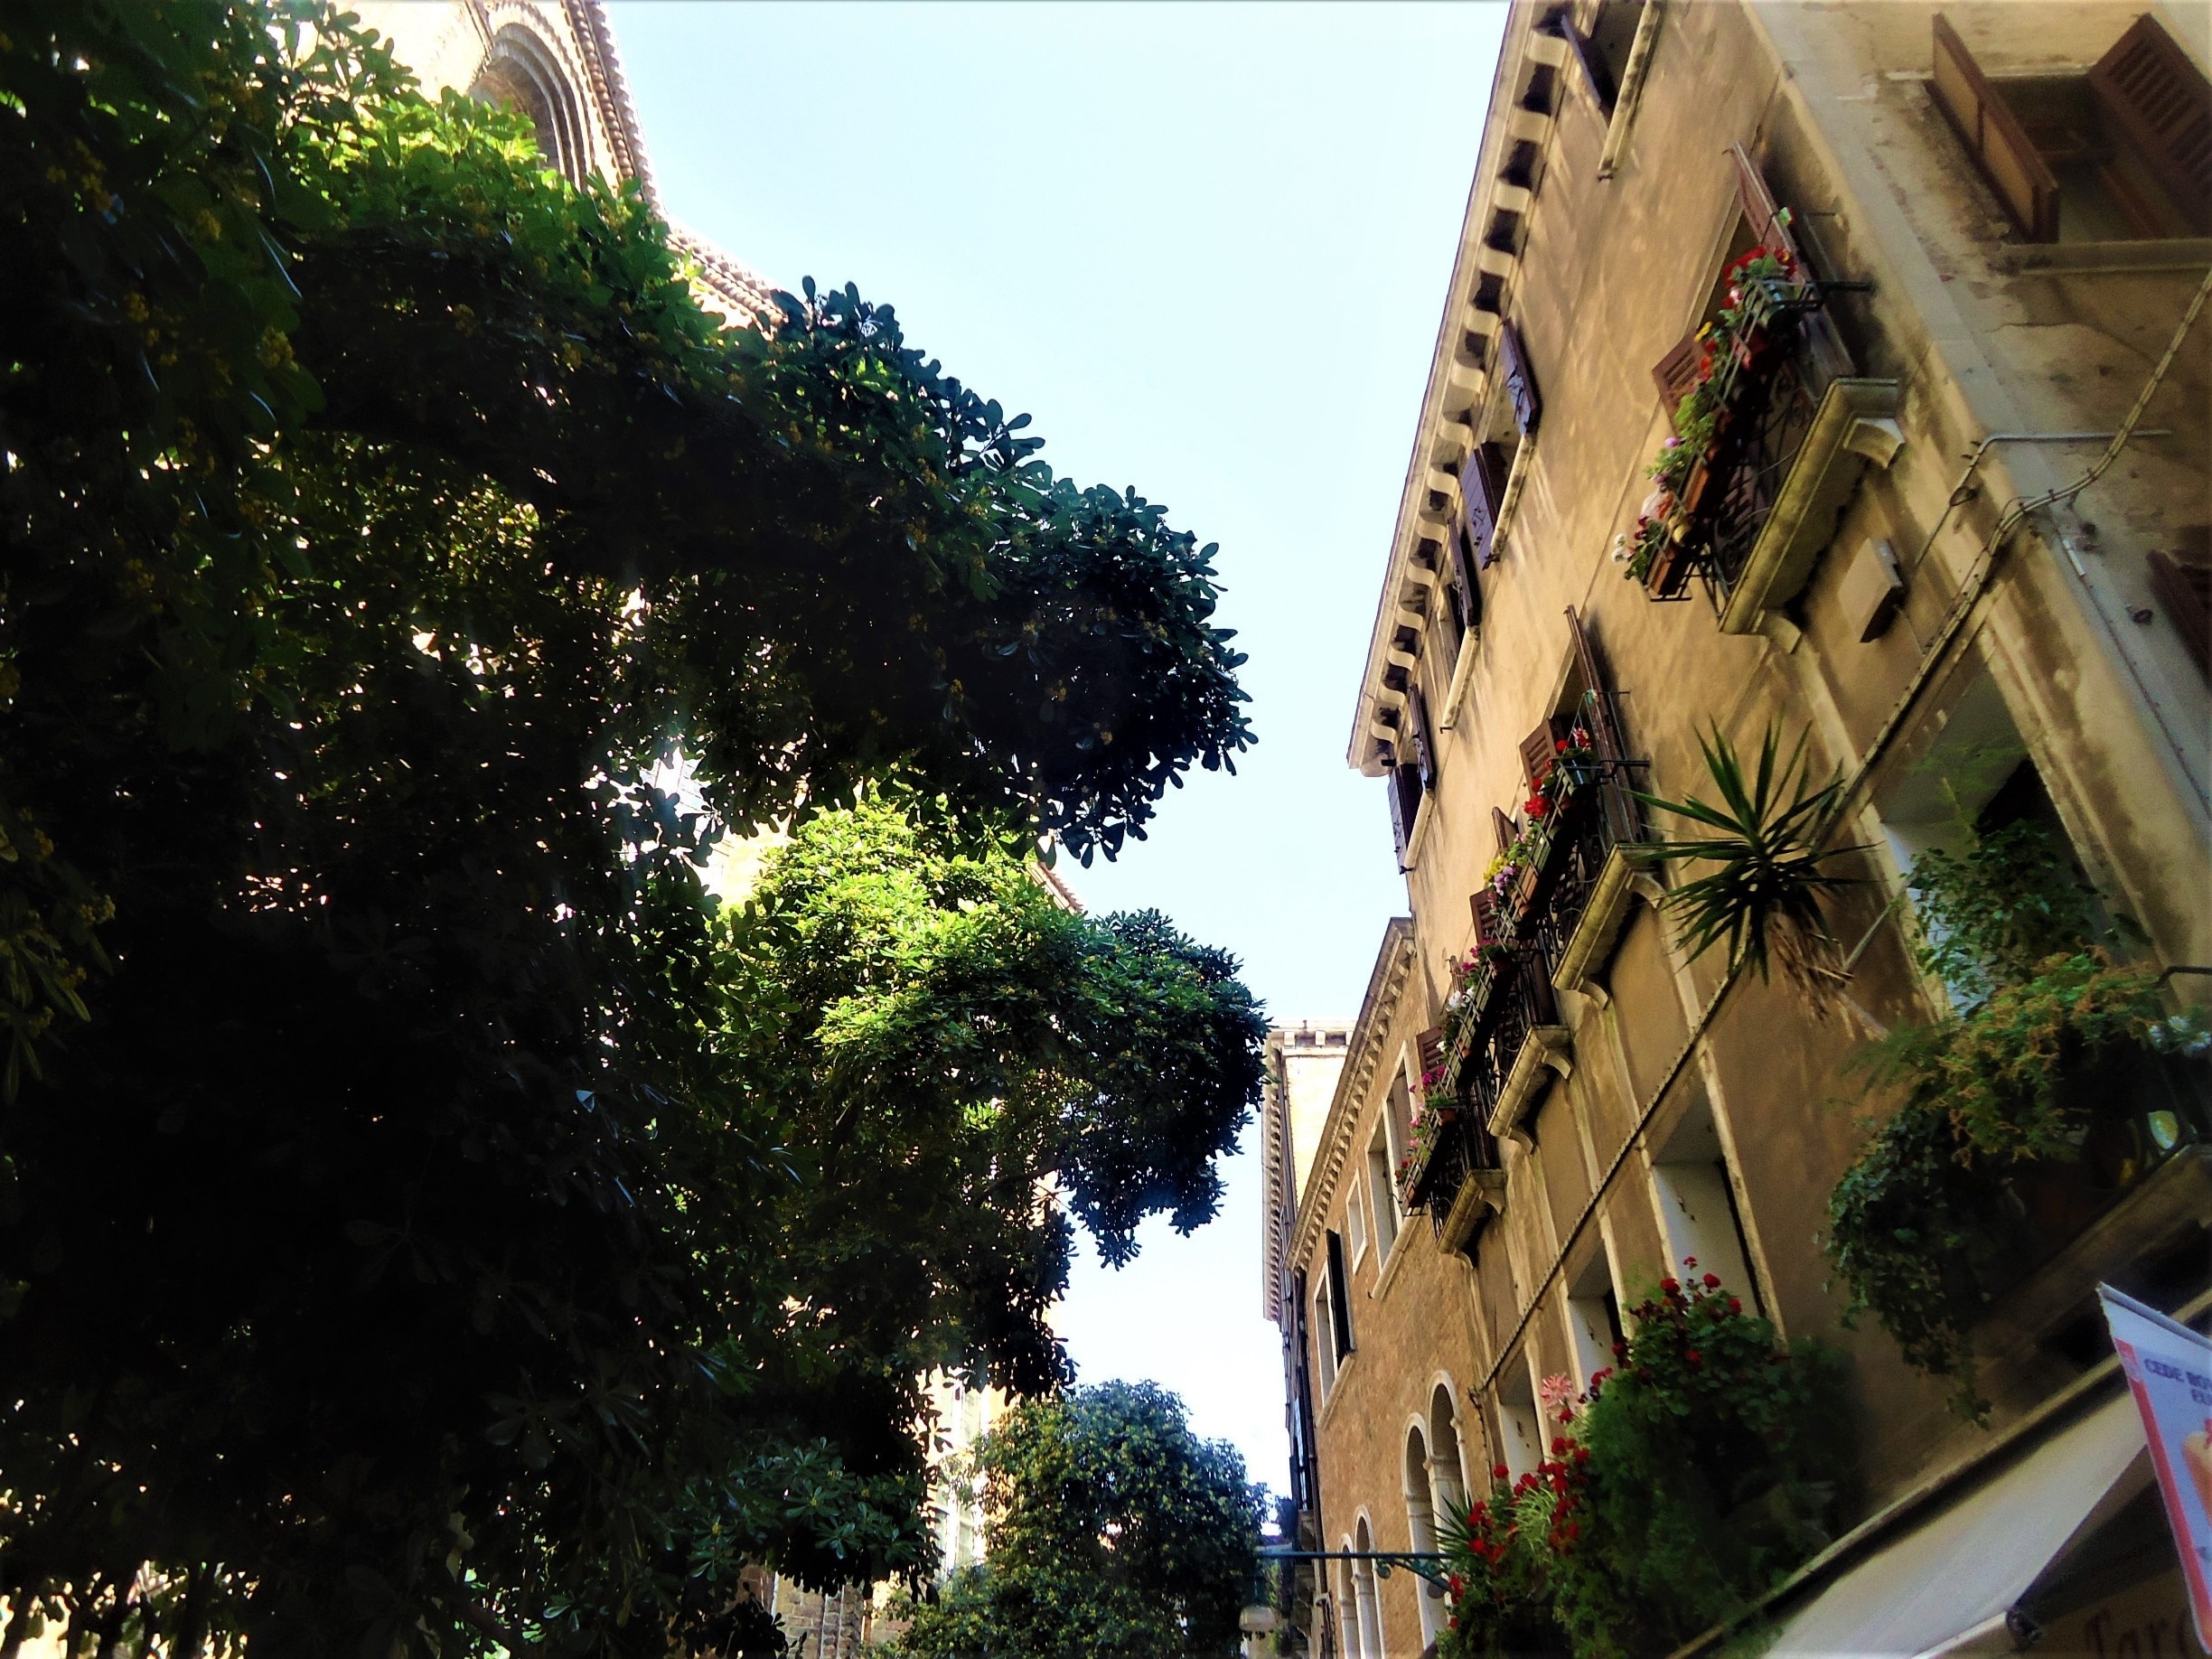 Walking through the cool shade of the #SalizadaSanRocco I couldn't help but admire the colour and the Beautiful buildings in this street, with the #Basilica dei Frari peepng through the #trees.
#Mediterranean
#LifeatExpedia
#Blue
#Architecture
#Colorful
#TreeTrove